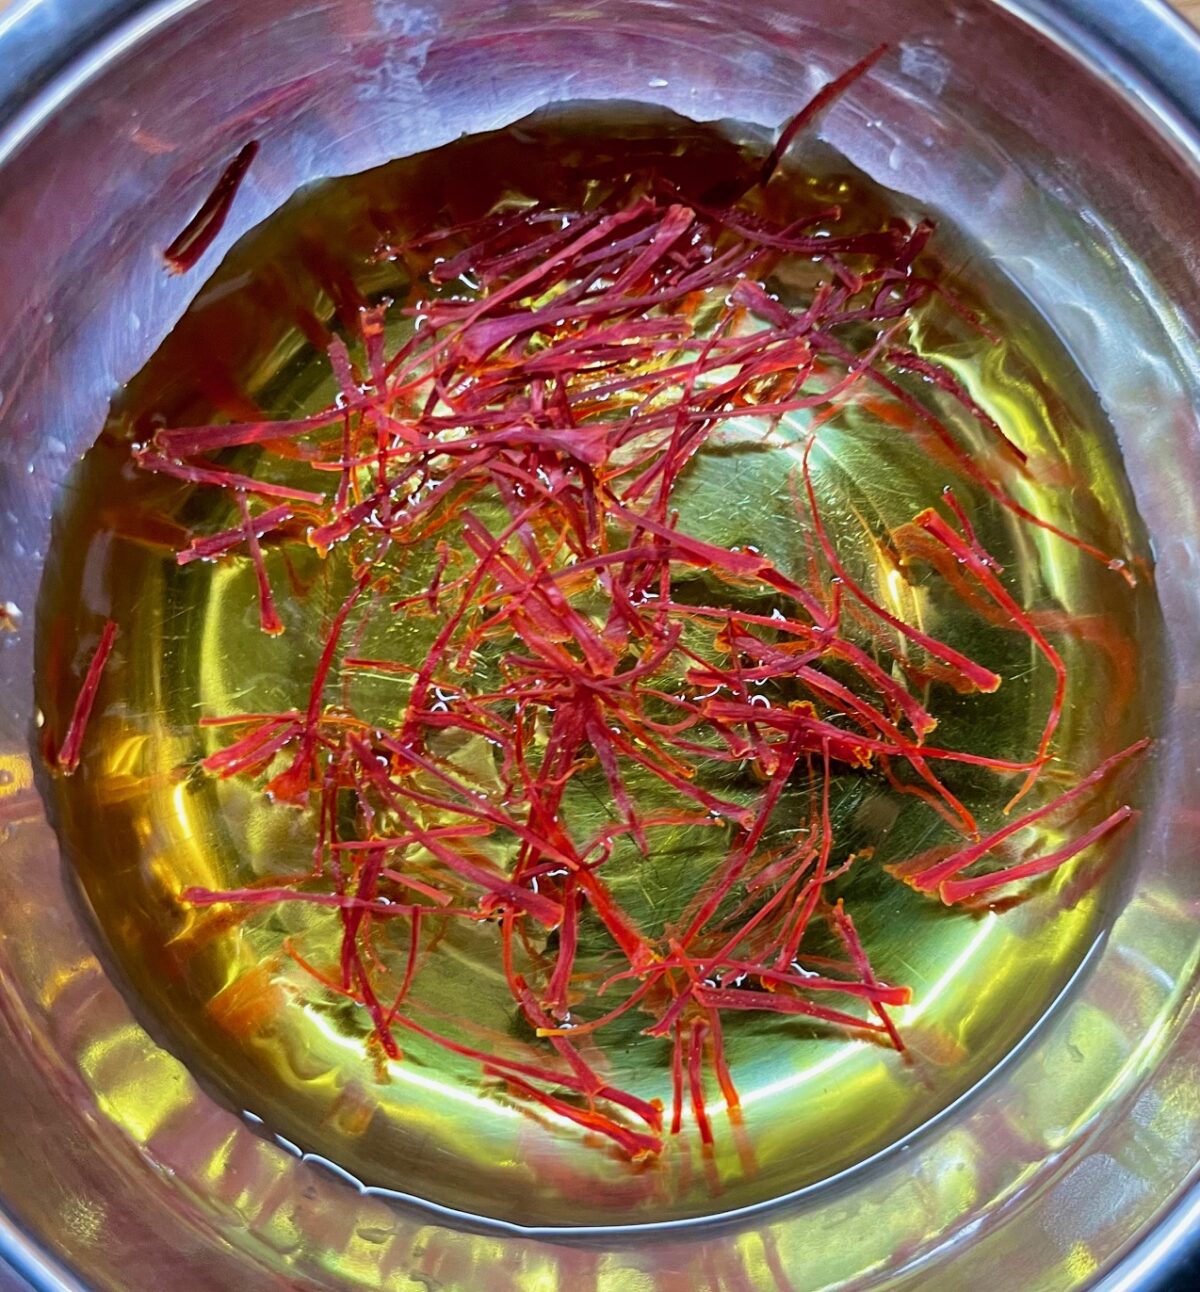 Saffron mixed with water in a bowl in a stainless steel bowl.